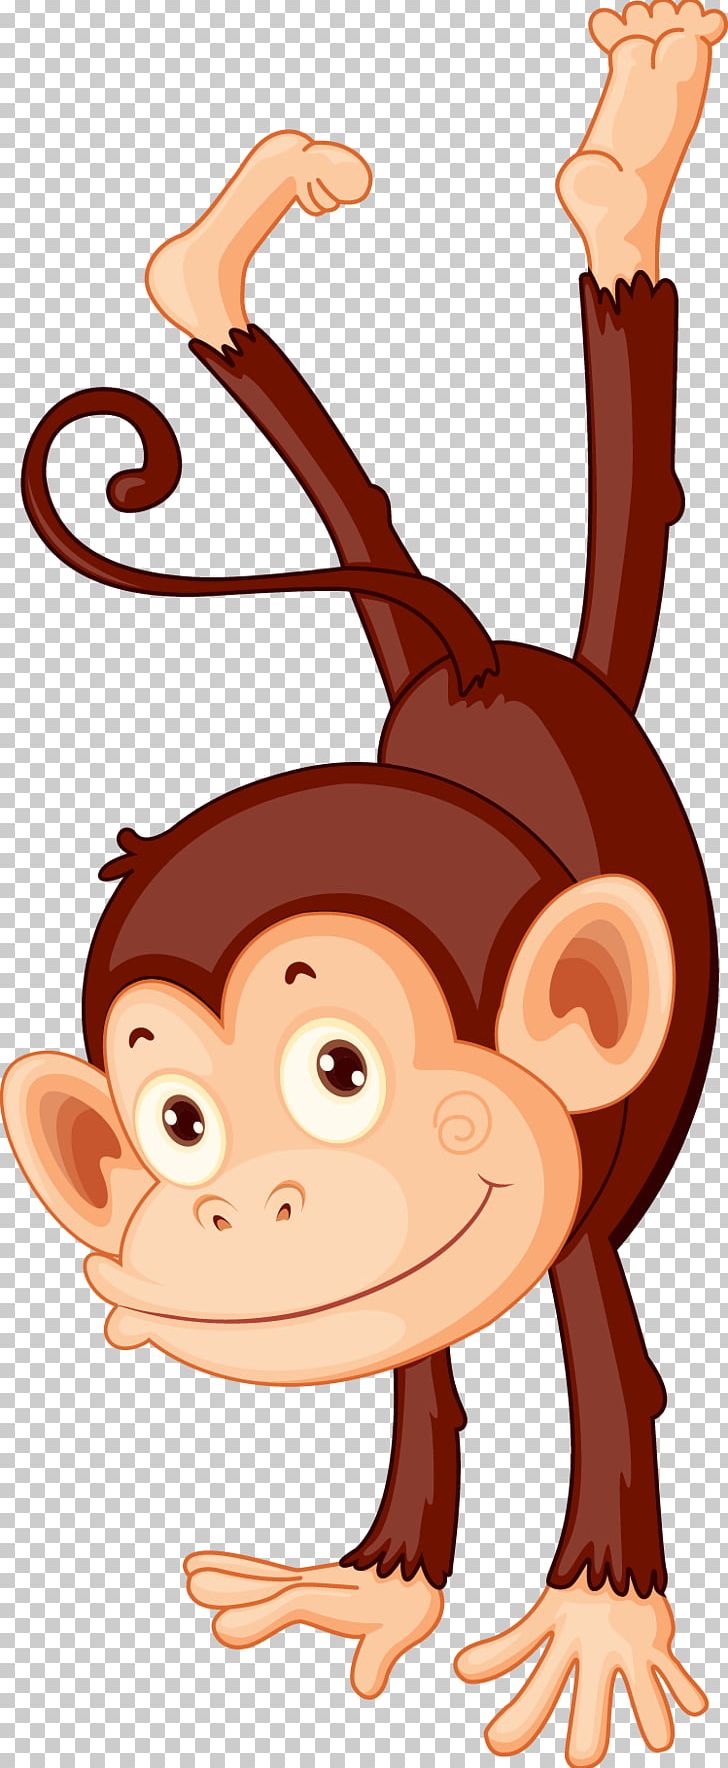 Baboons Monkey Crab-eating Macaque Illustration PNG, Clipart, Animals, Arm, Brown, Cartoon, Eye Free PNG Download